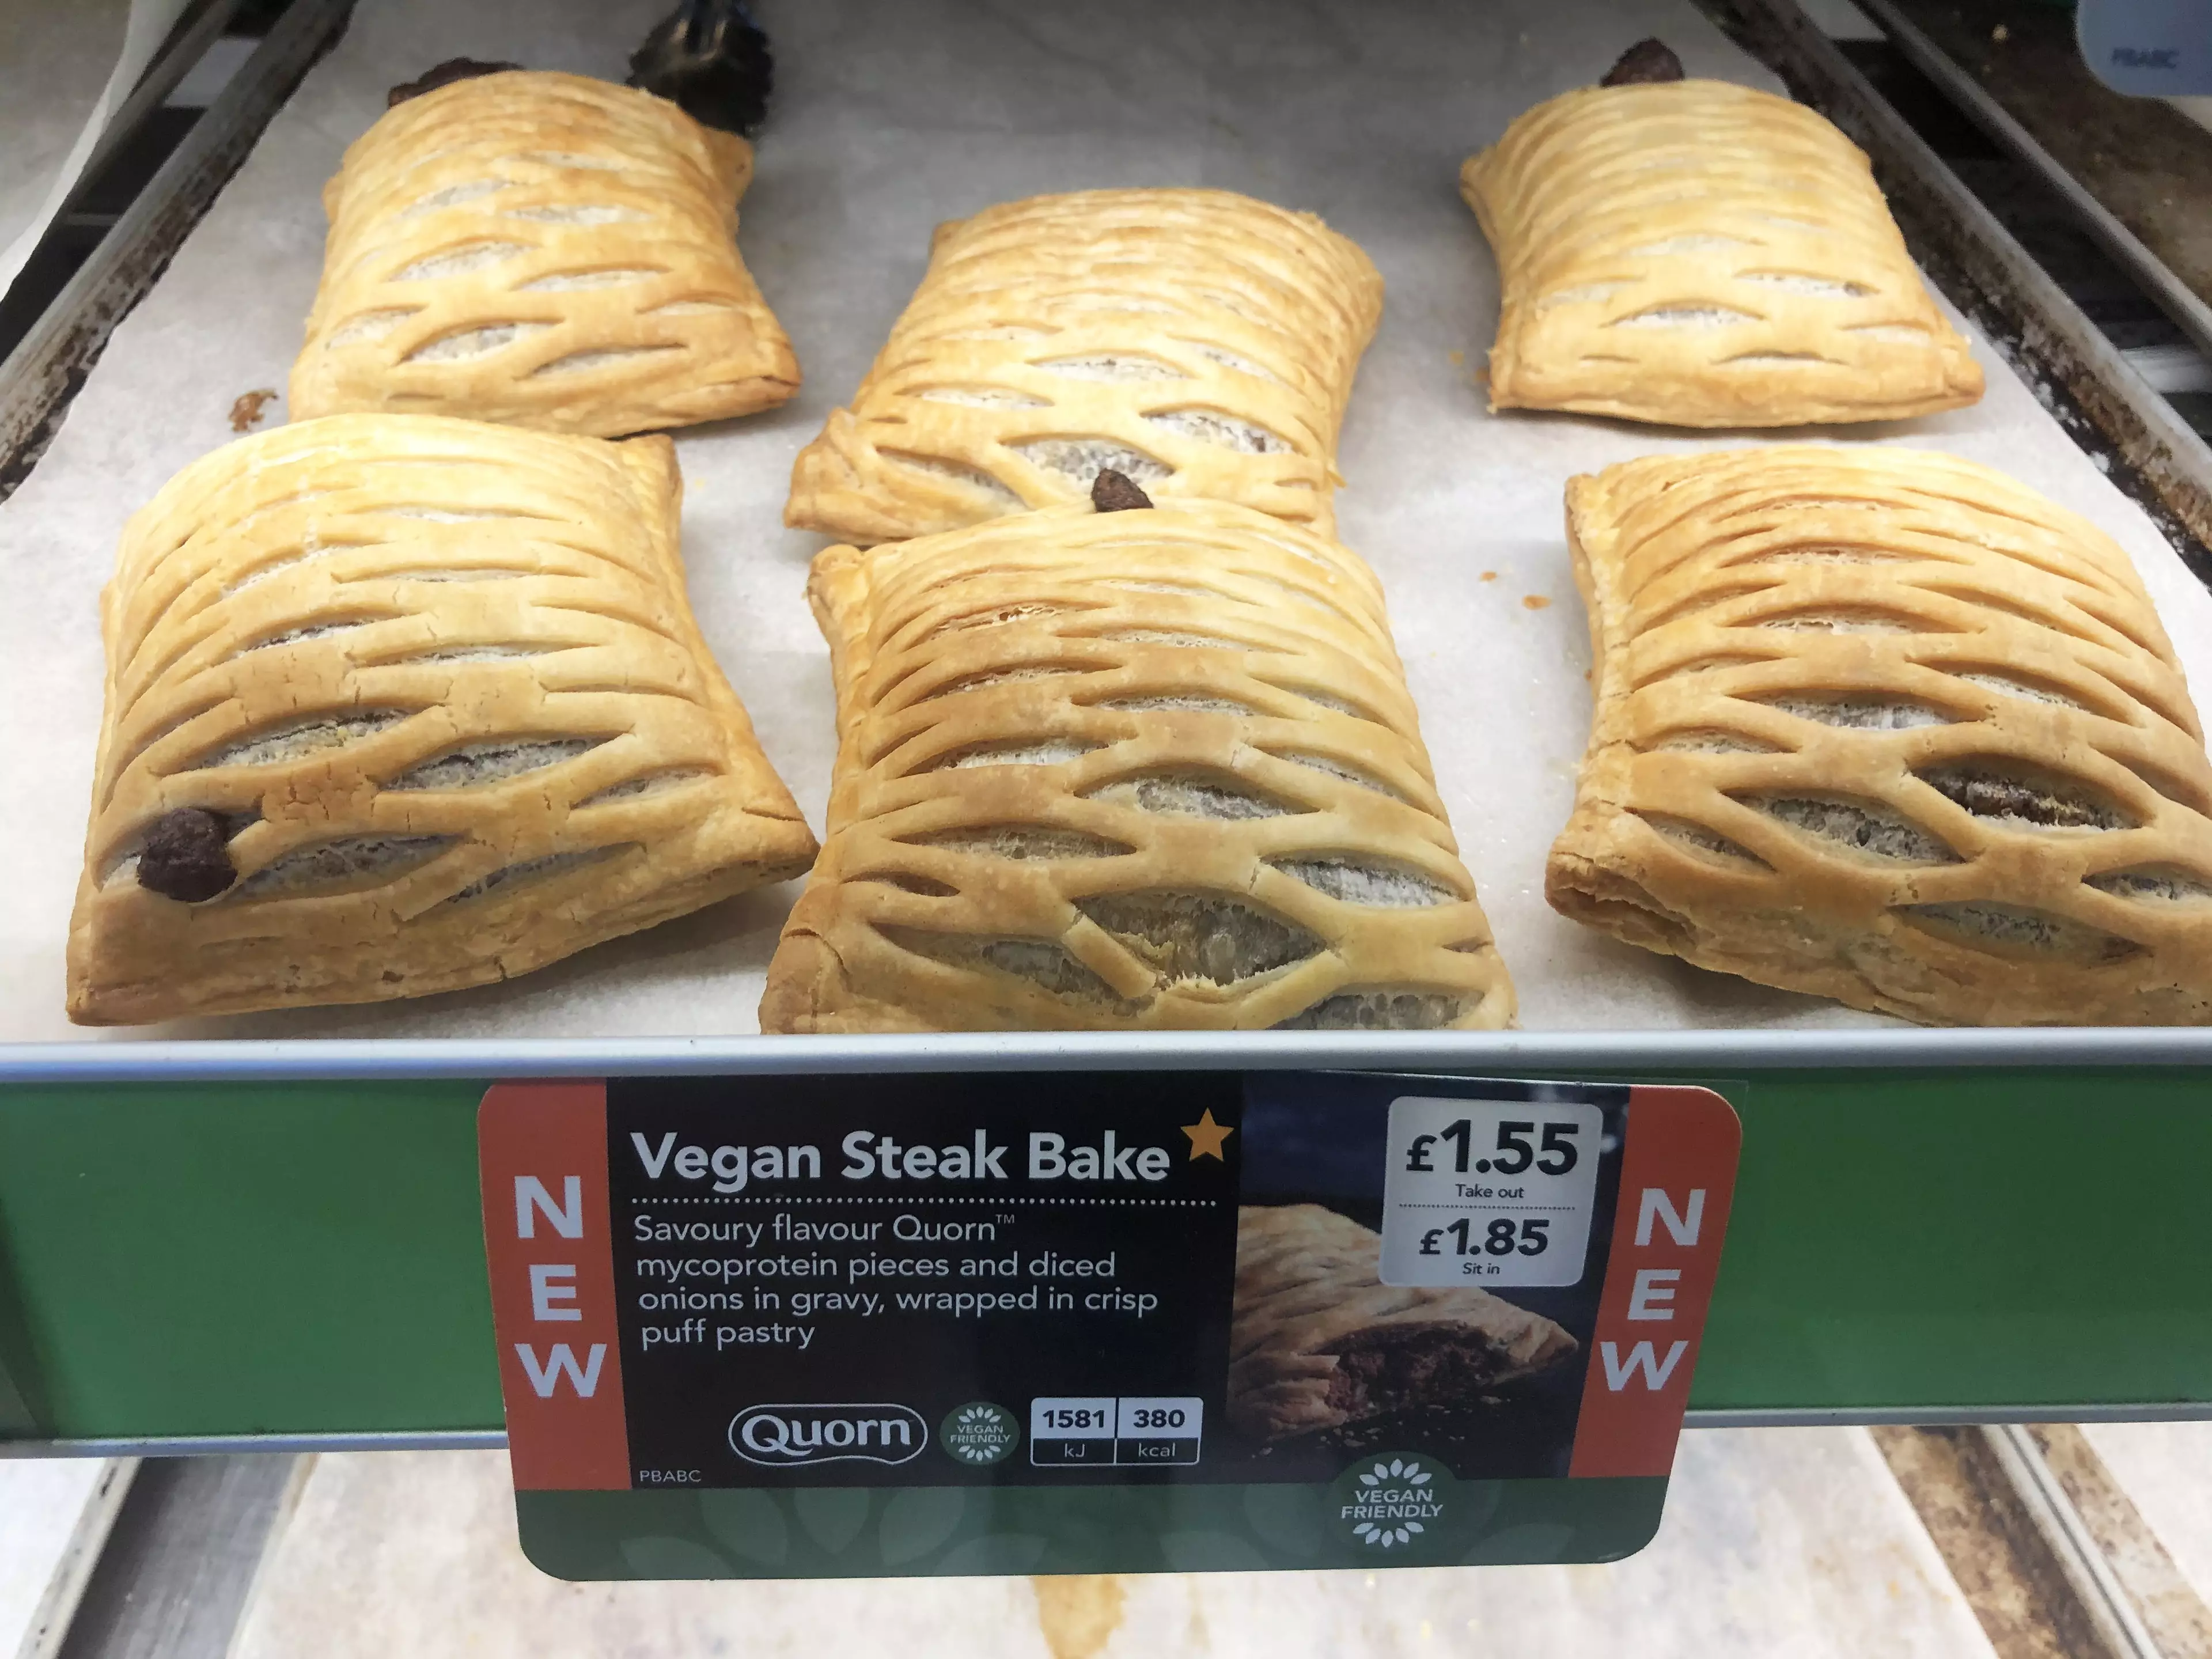 The bakery chain has made vegan food more accessible to the public.